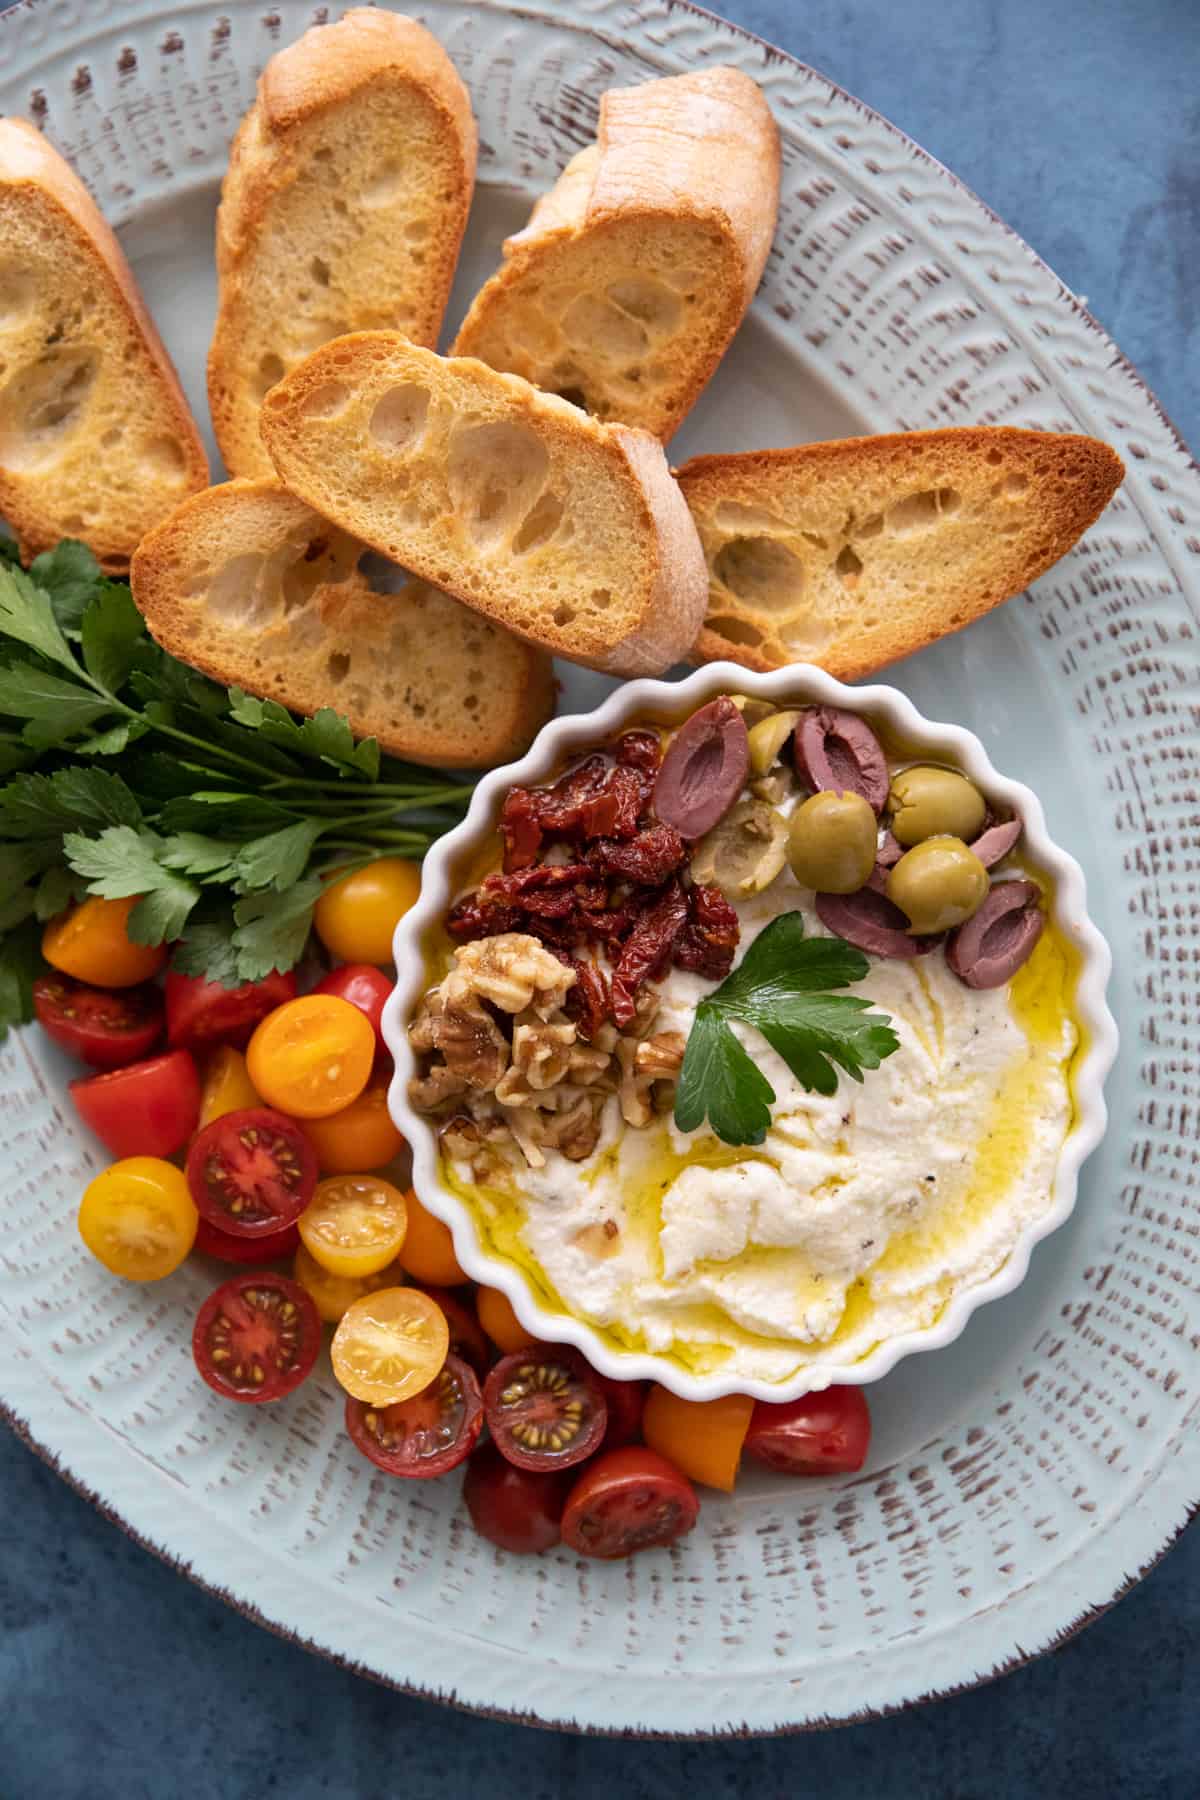 Whipped ricotta in a bowl with bread, tomatoes and herbs.